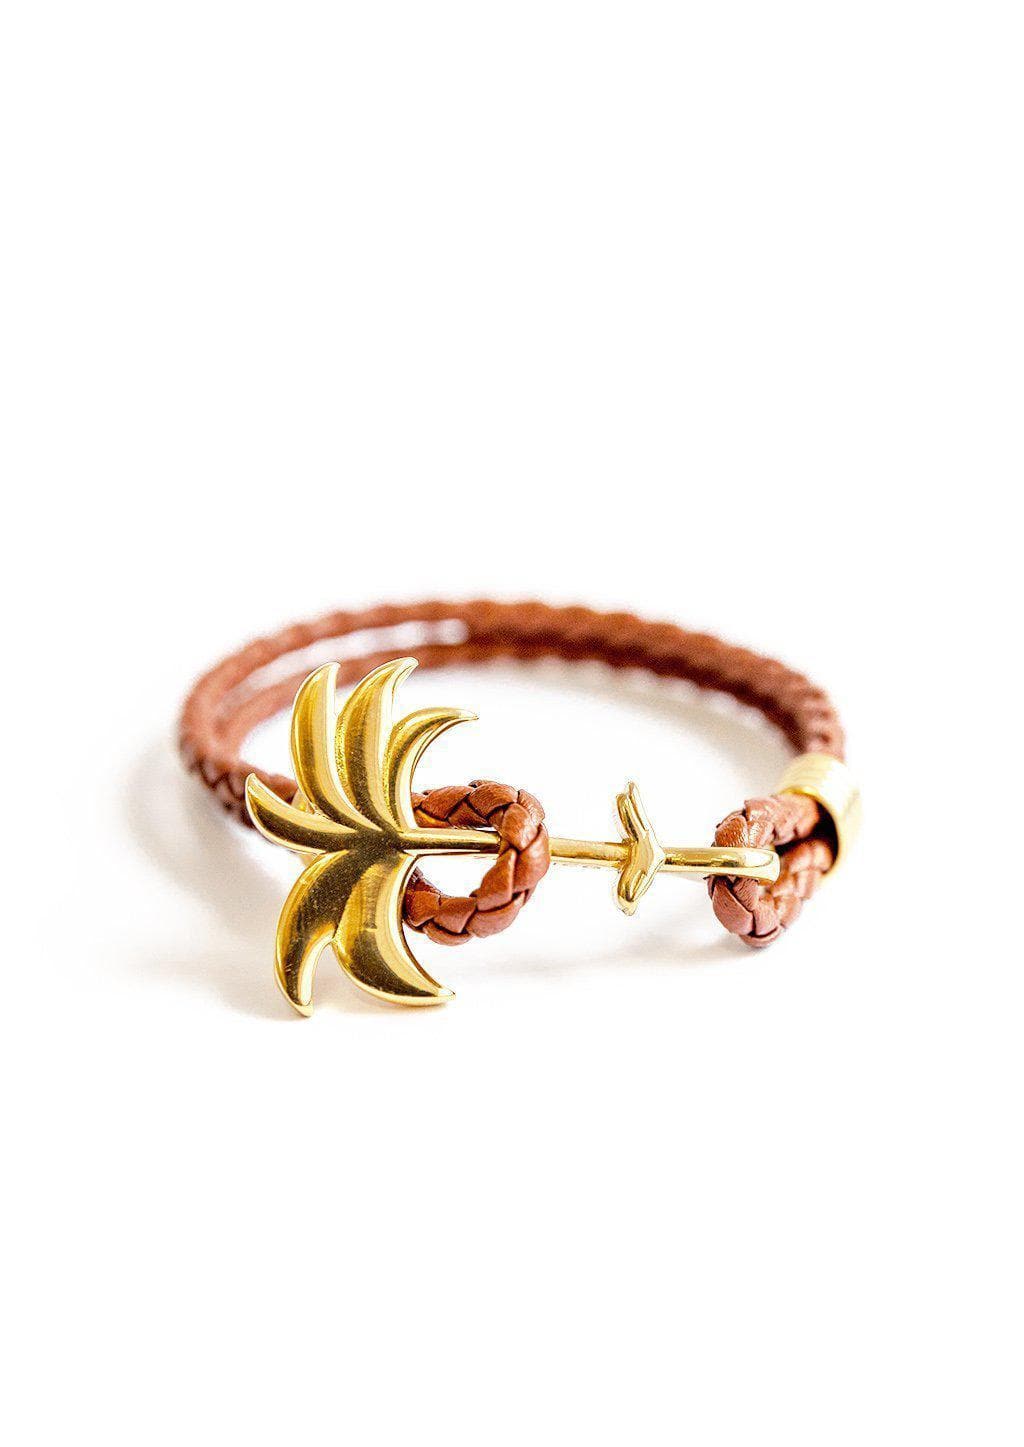 Sunrise Gold - Palm anchor bracelet with brown leather. 